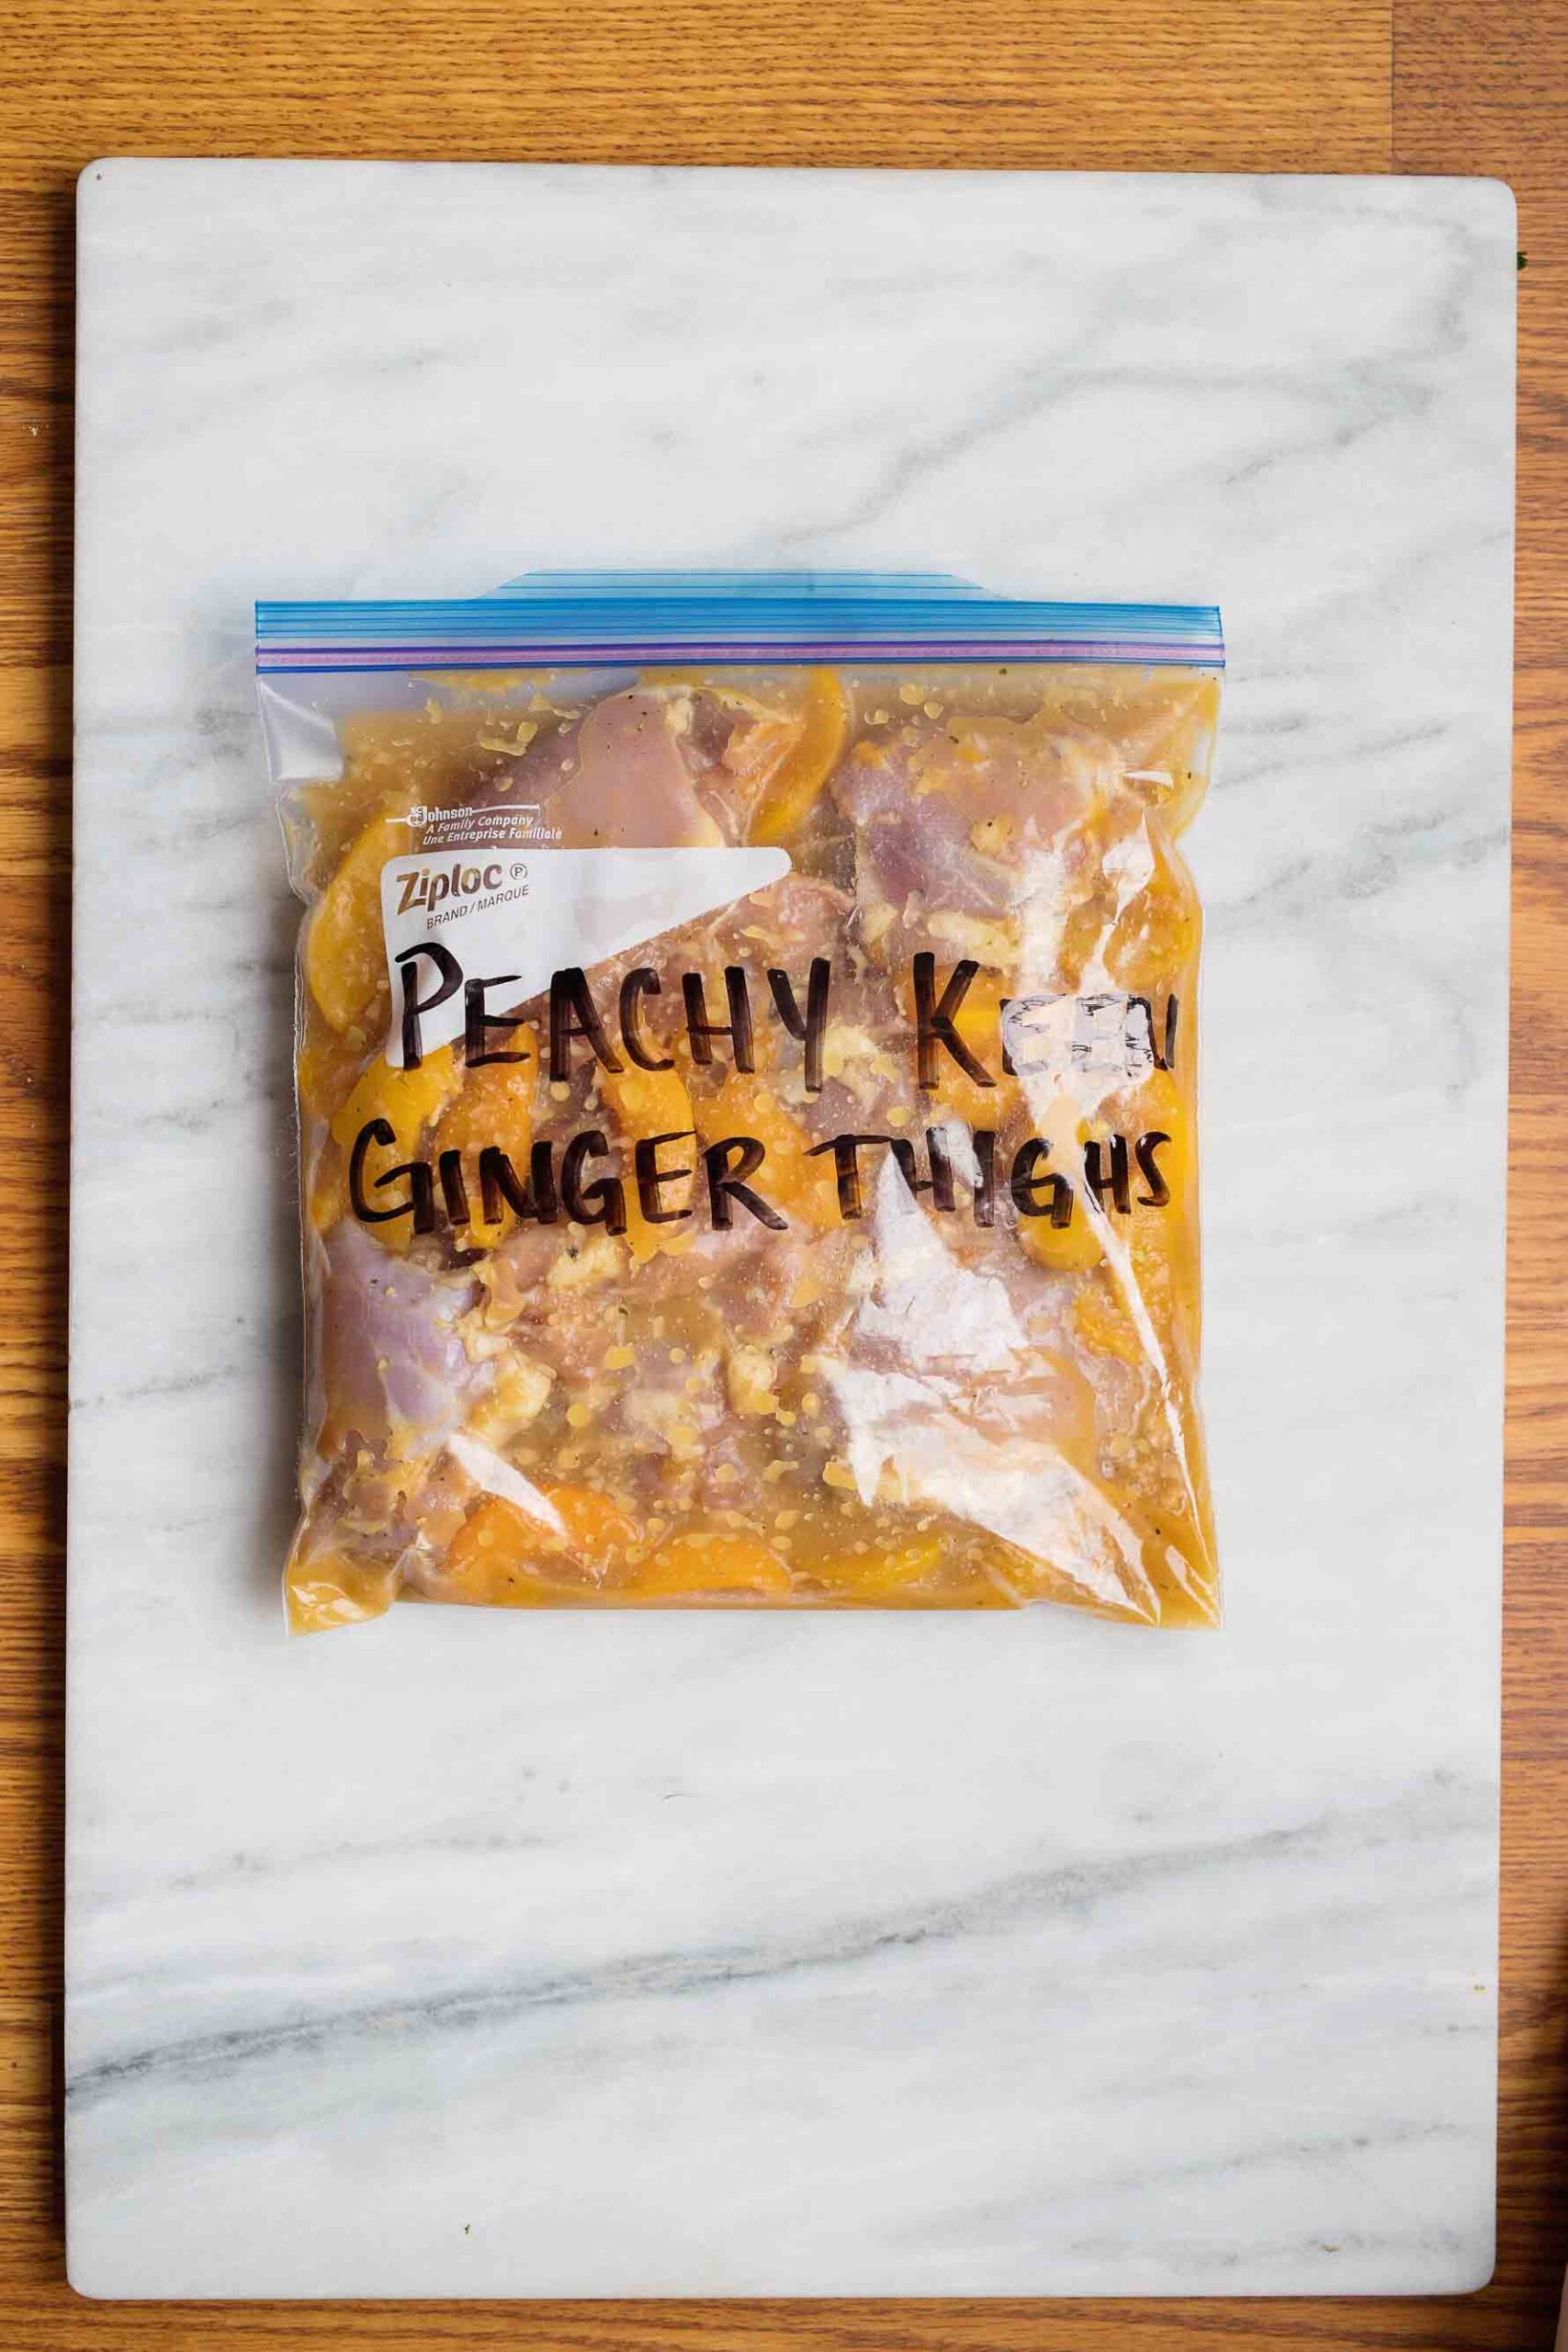 A resealable bag with raw chicken and sauce in it with the words peachy keen ginger thighs written in black on it on a whit marble cutting board.